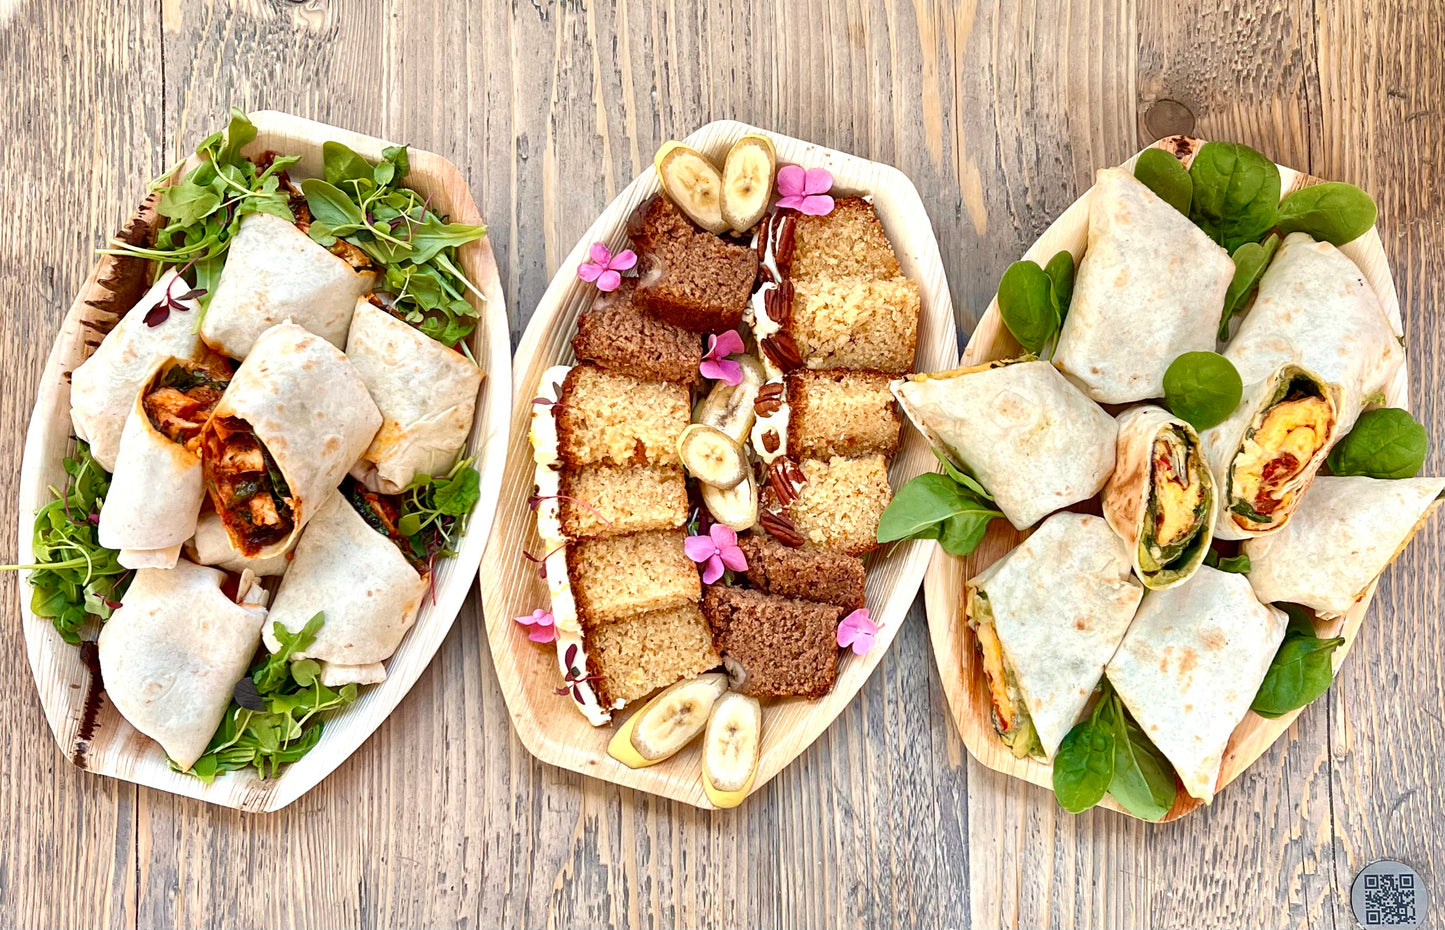 SHARING-STYLE LUNCH PLATTER